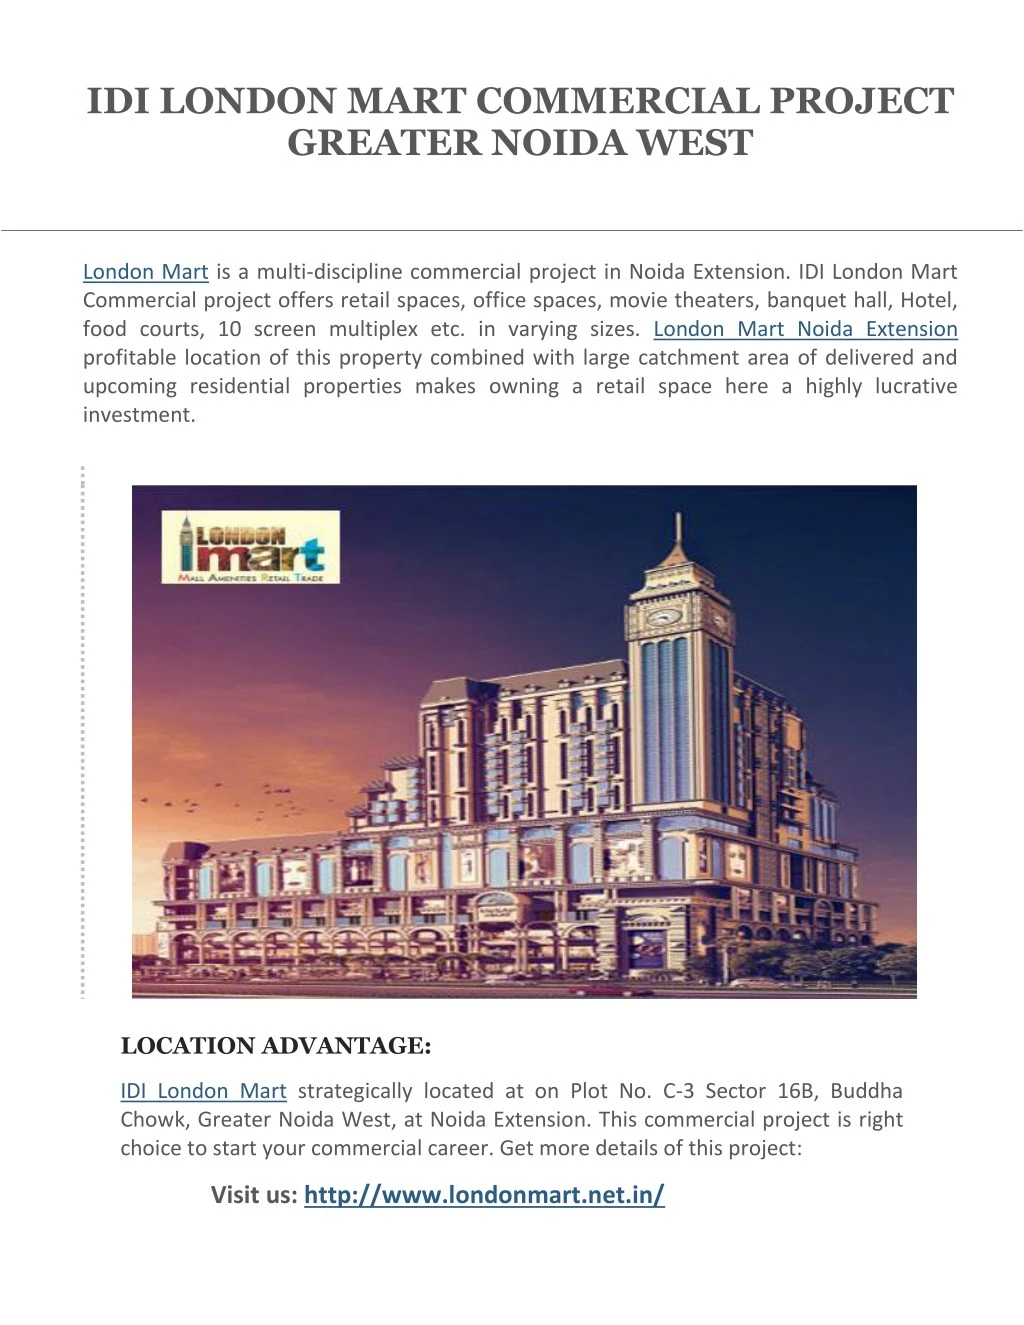 idi london mart commercial project greater noida